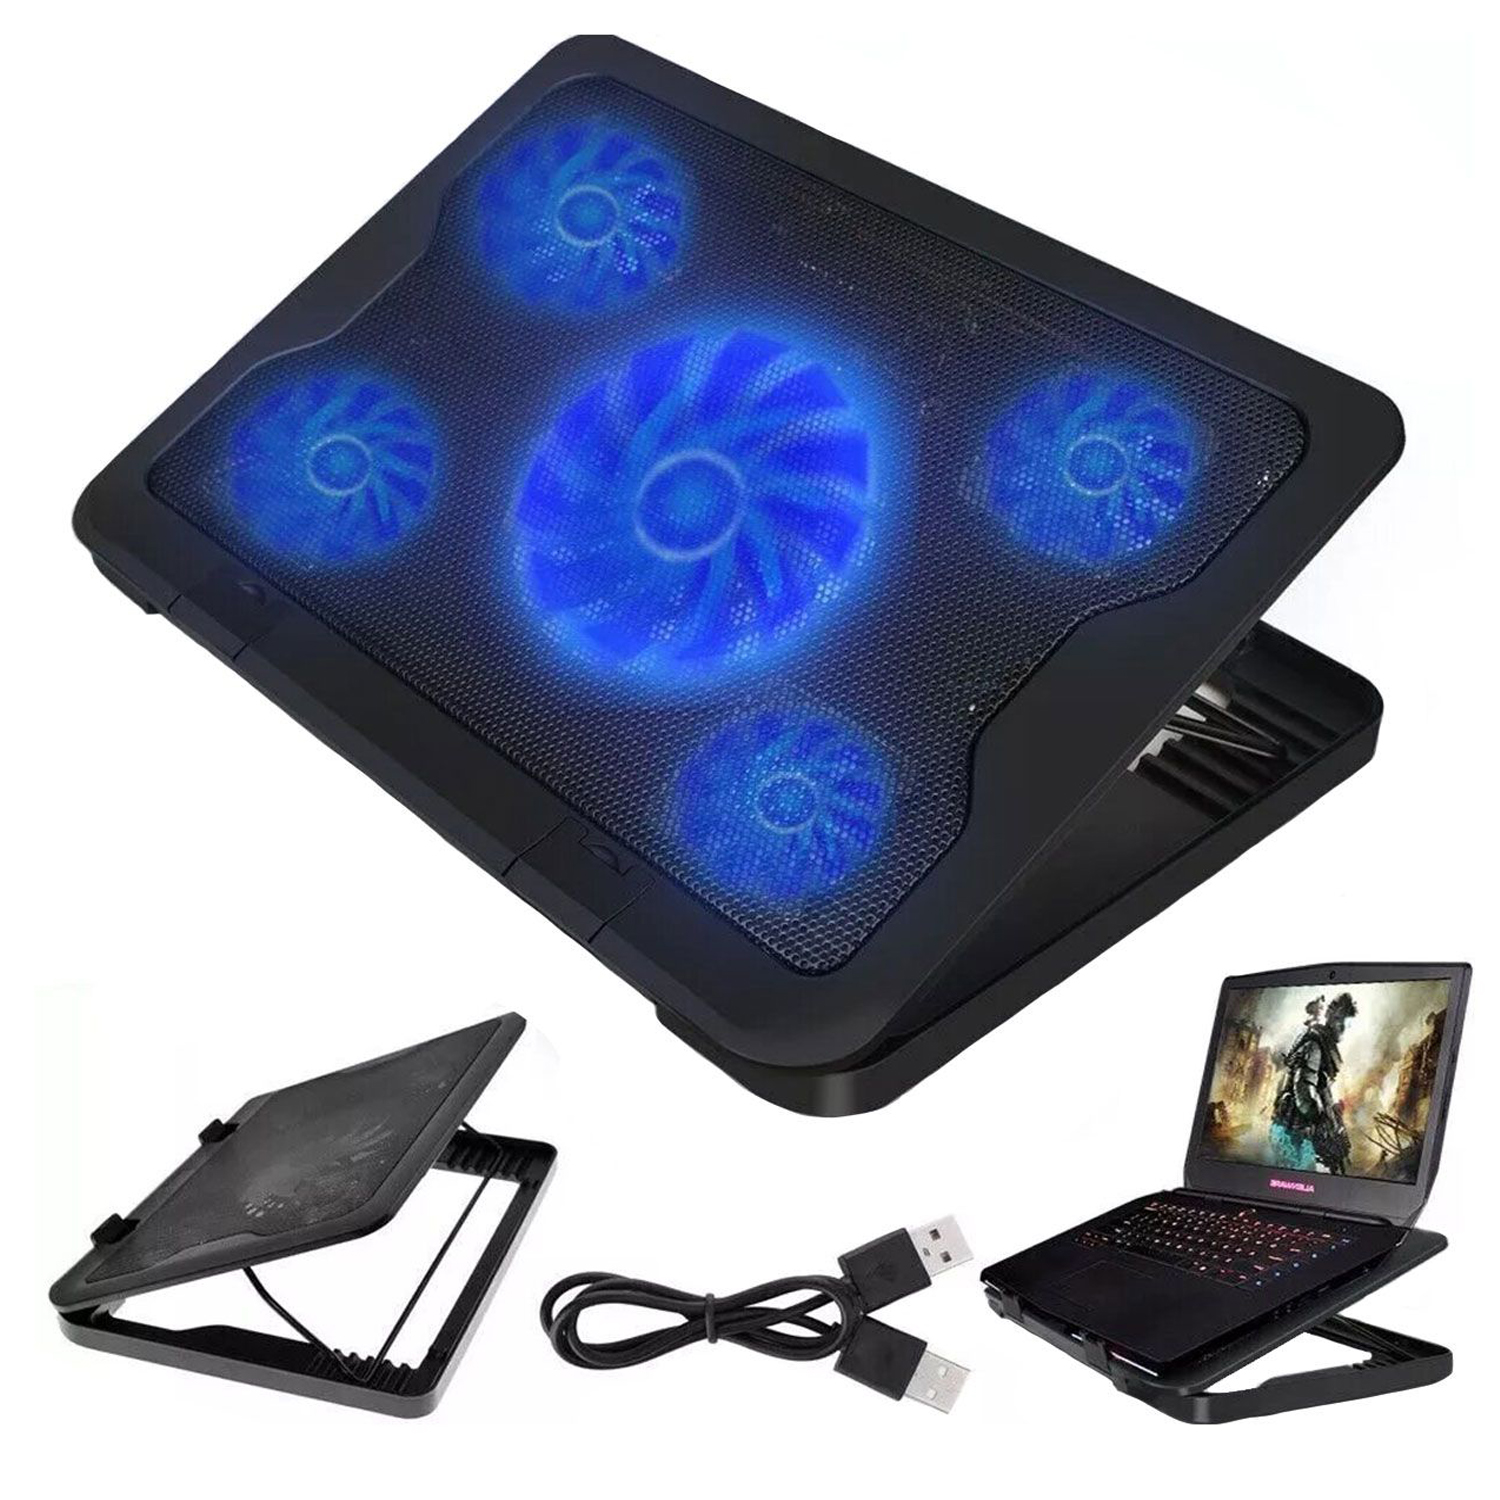 SY C5 5 Fans LED USB Cooling Adjustable Pad For Laptop Notebook 7 17inch%20(5)